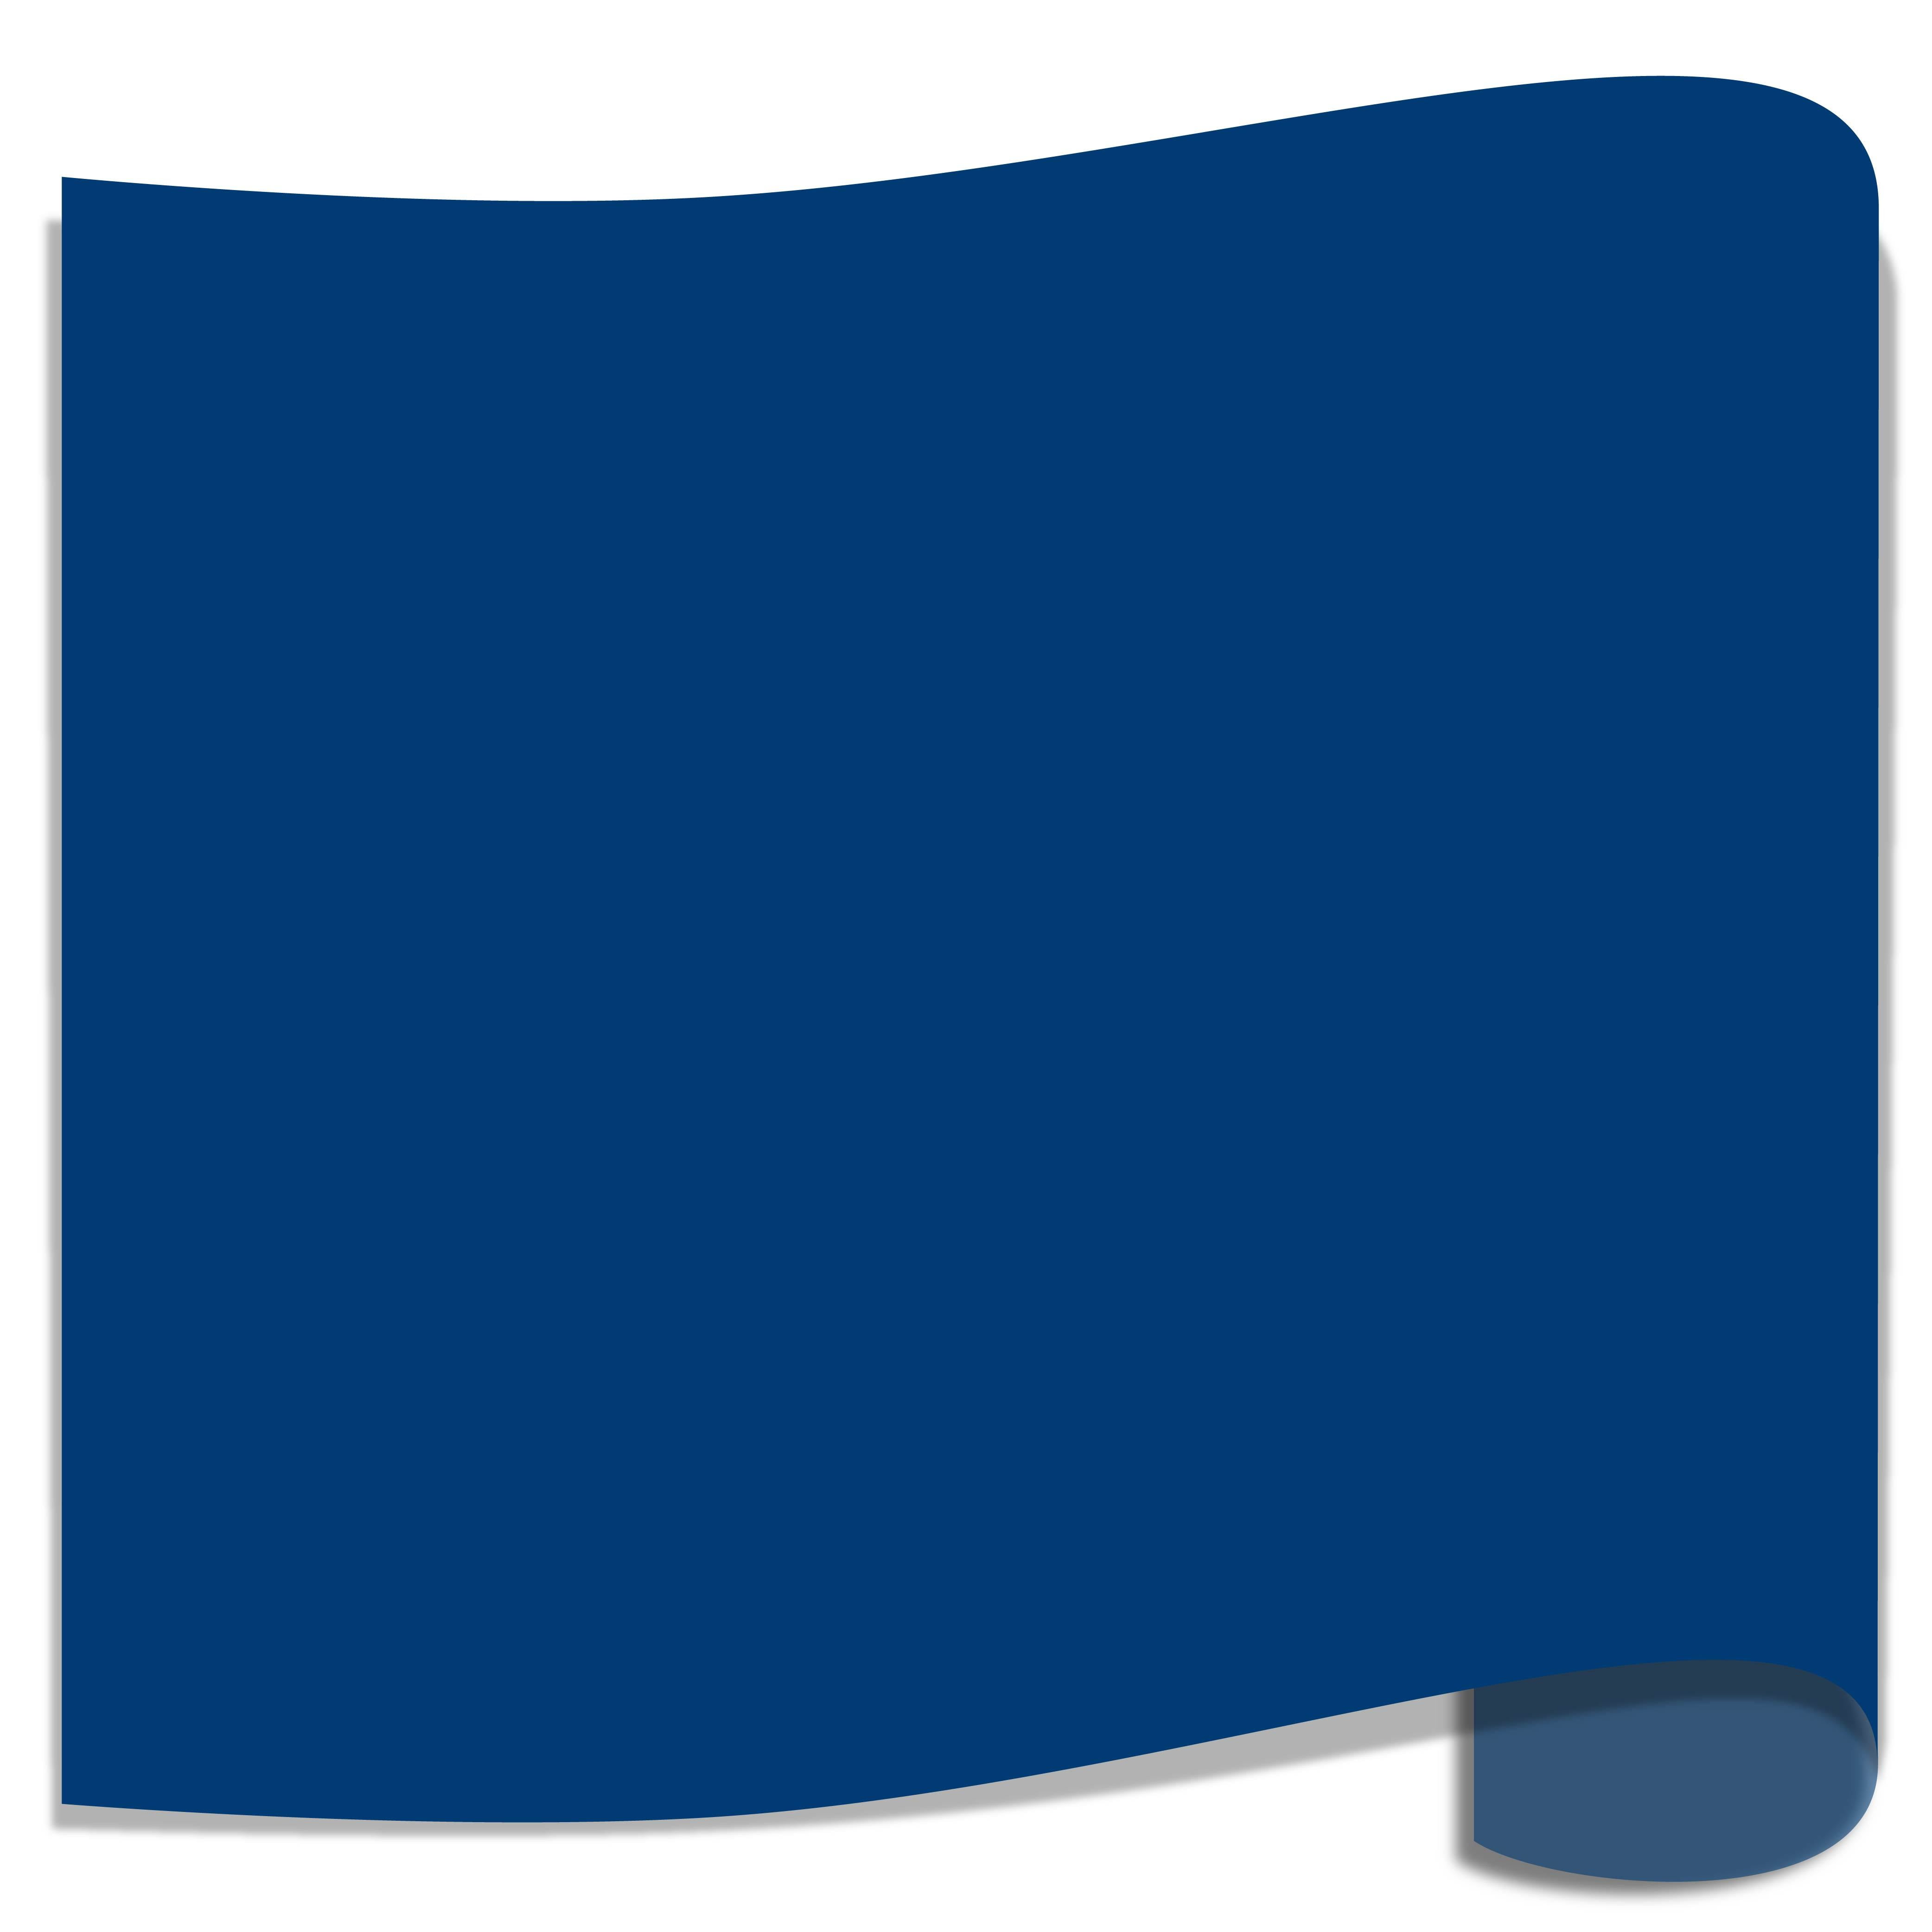 Siser EasyWeed Iron On Heat Transfer Vinyl 15 Inches x 12 Inches Sheet Royal Blue